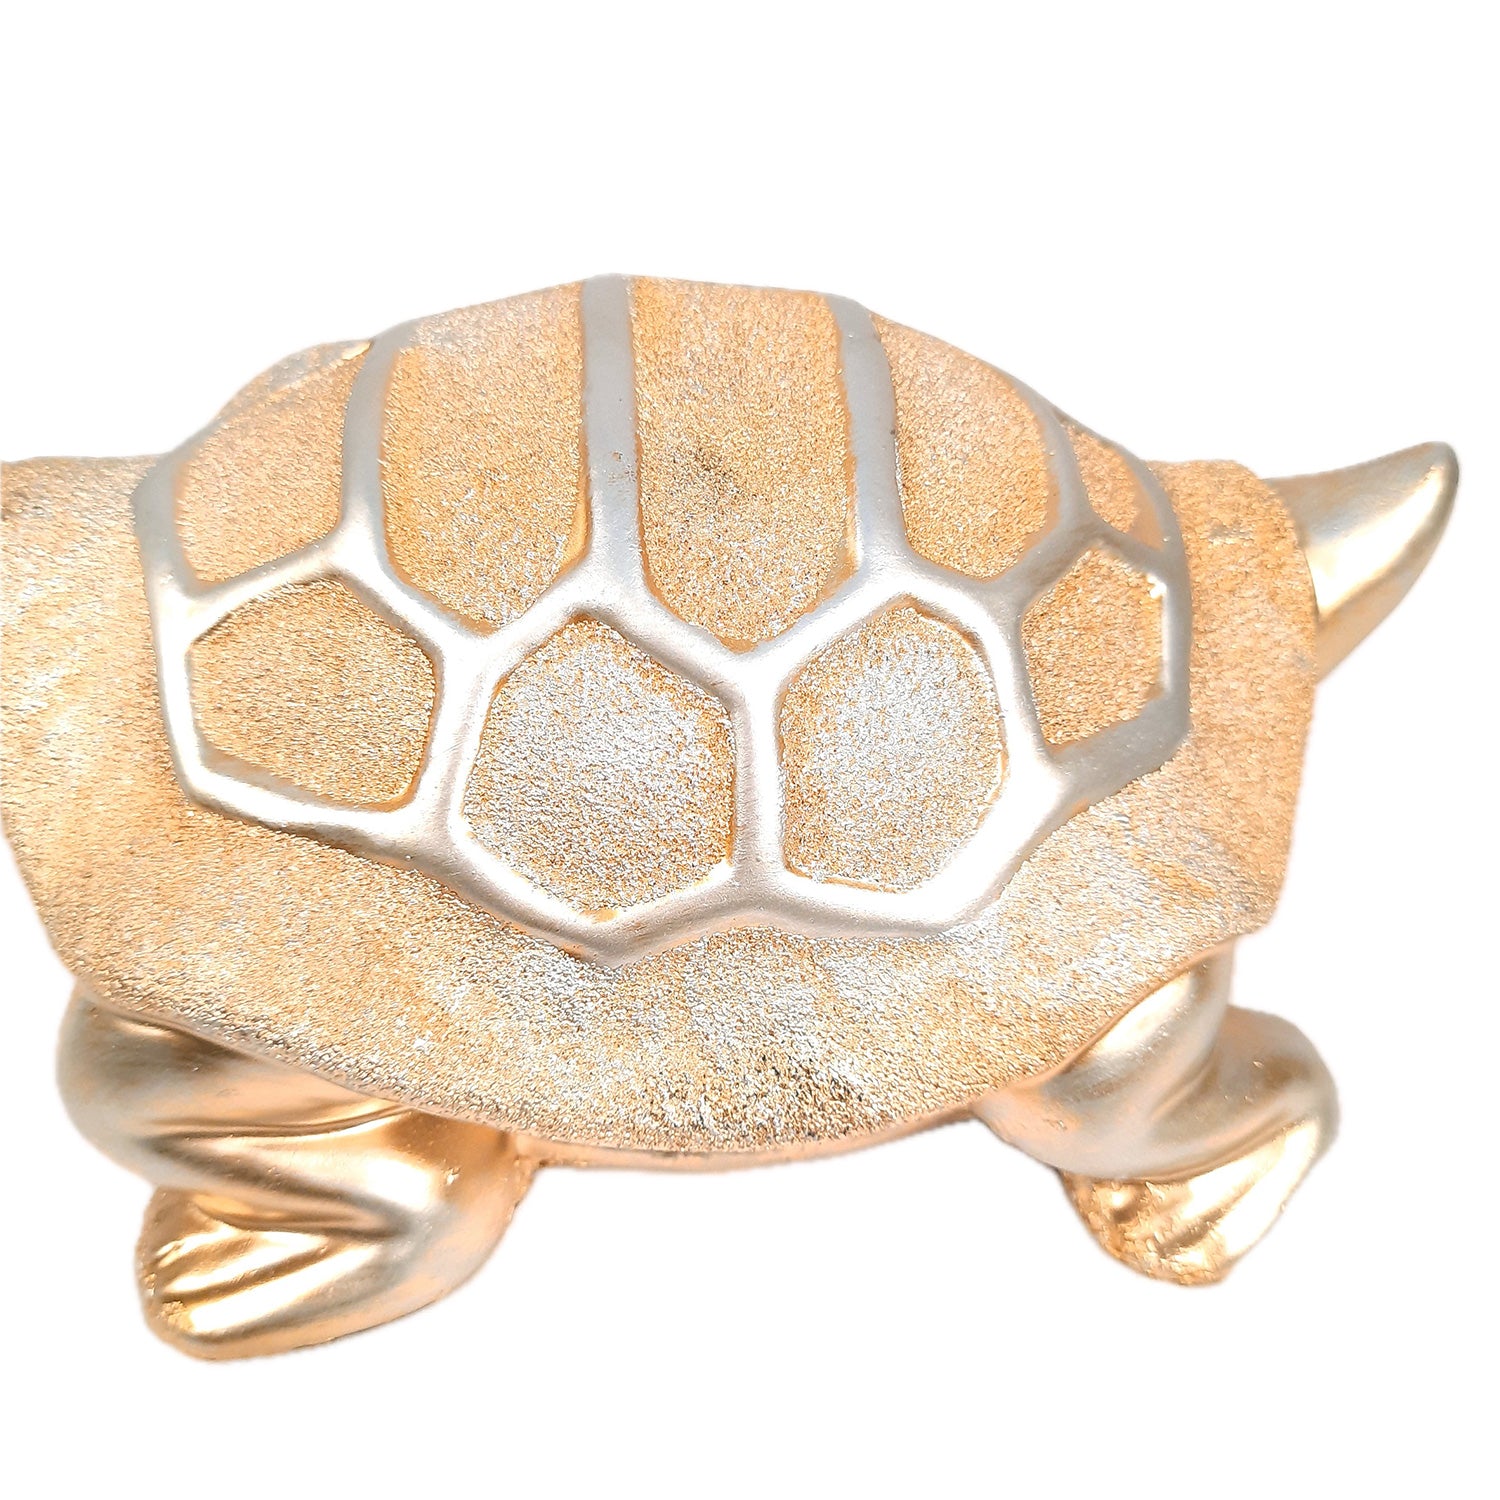 Feng Shui Tortoise Showpiece Set for Good Luck | Turtle Figurines for Good Luck & Positive Energy - For Home Decor, Living Room, Office & Gift Success - Apkamart #Style_Style 3